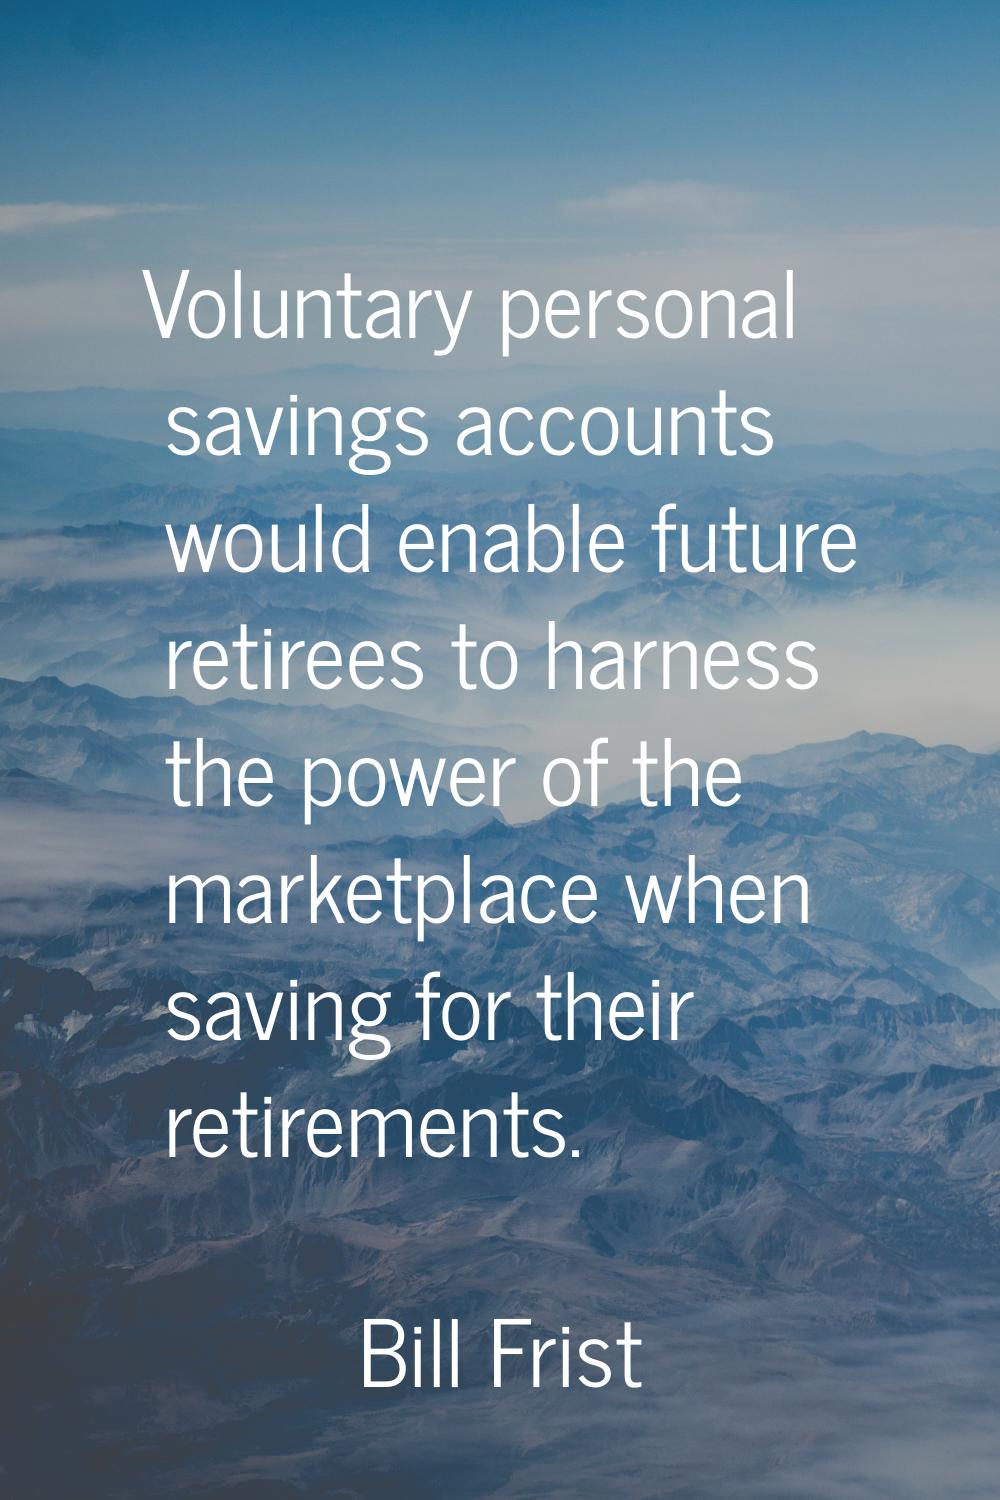 Voluntary personal savings accounts would enable future retirees to harness the power of the market